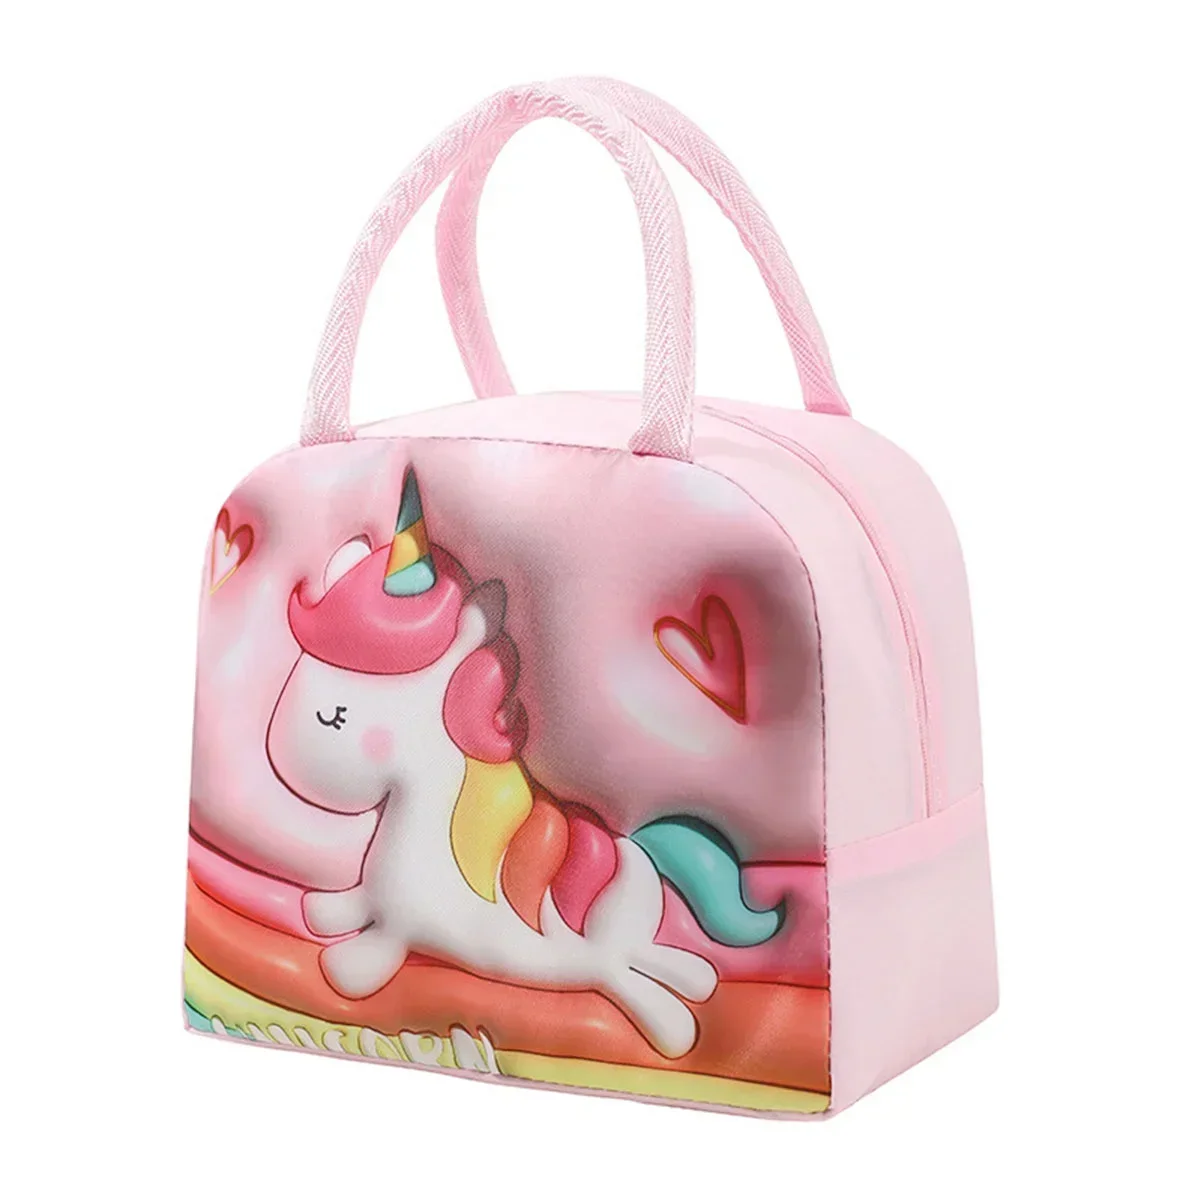 

Lunch Bag Thickened Handheld Insulated Lunch Box Bag Children Cute With Meals Lunch Box Bag